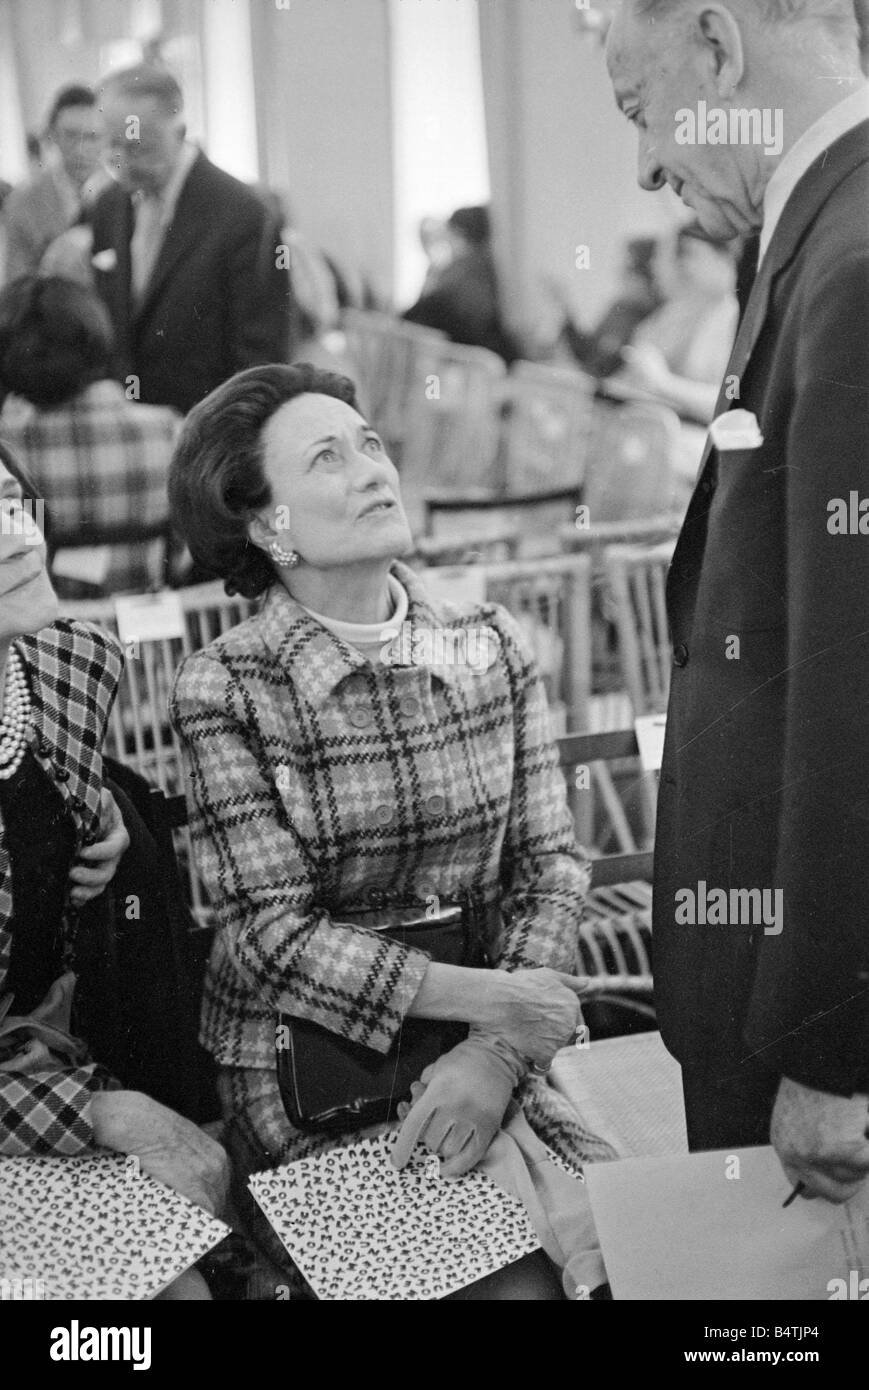 Duchess Of Windsor January 1967 Pictured at Fashion Show in Paris France with Captain Edward Molyneux Fashion Designer British Royalty 1960s Smiling Wallace Simpson Captain Molyneux Mirrorpix Stock Photo